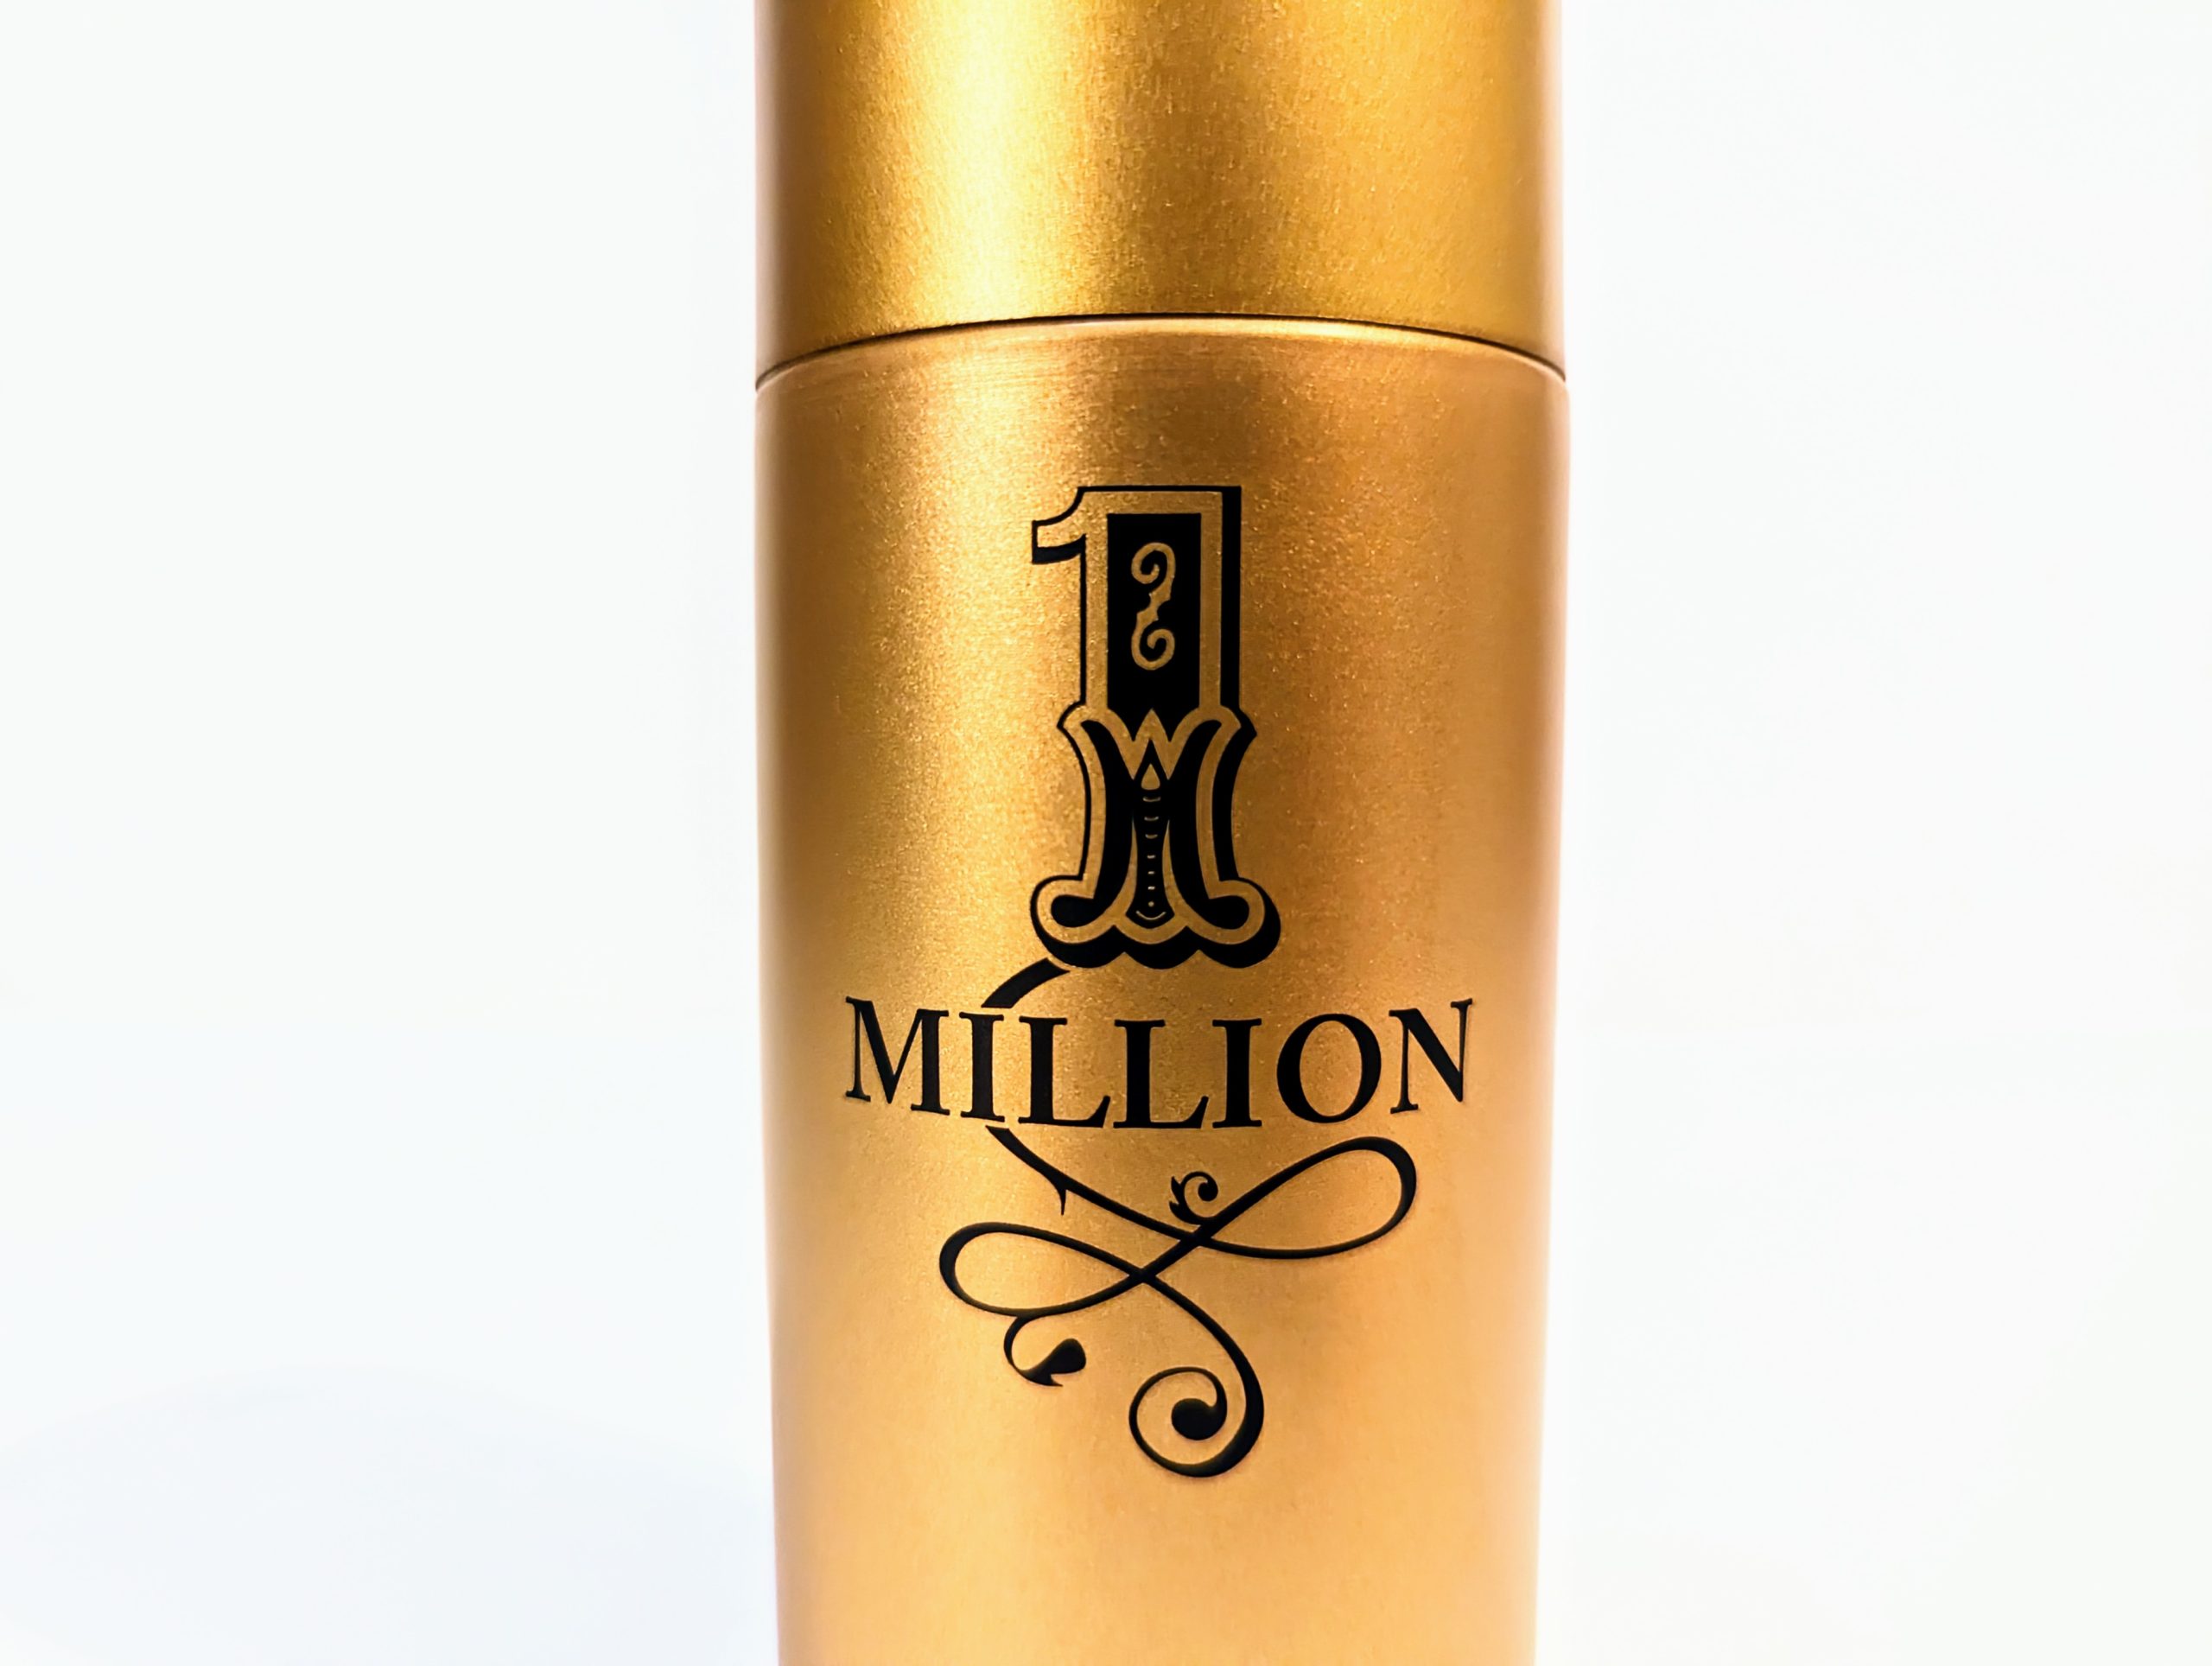 A gold-colored spray bottle labeled "1 Million" with an ornate design on the front.